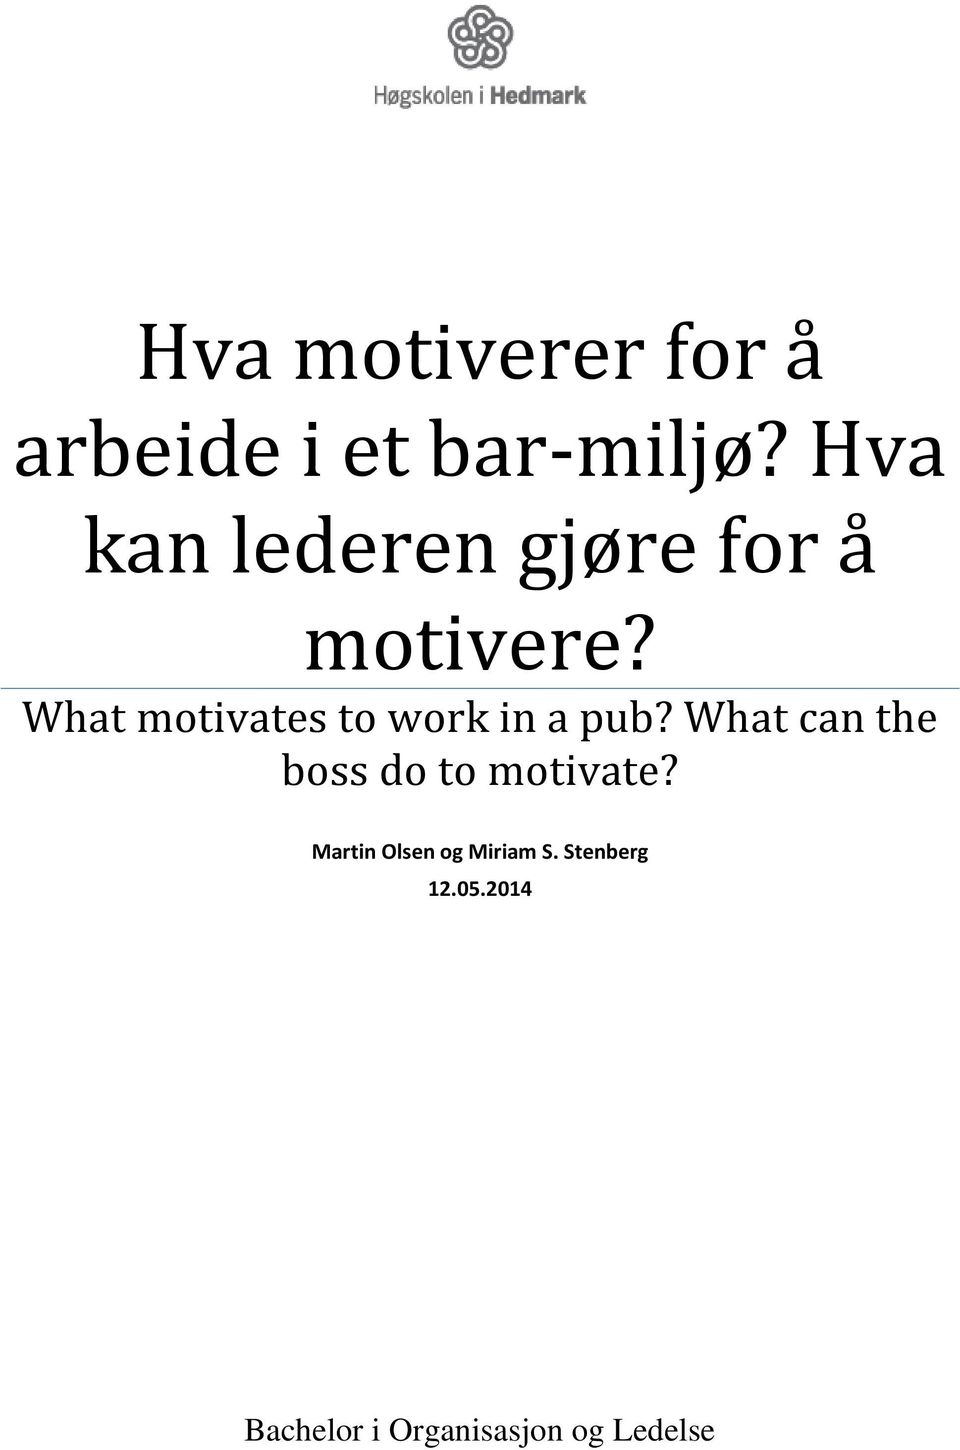 What motivates to work in a pub?